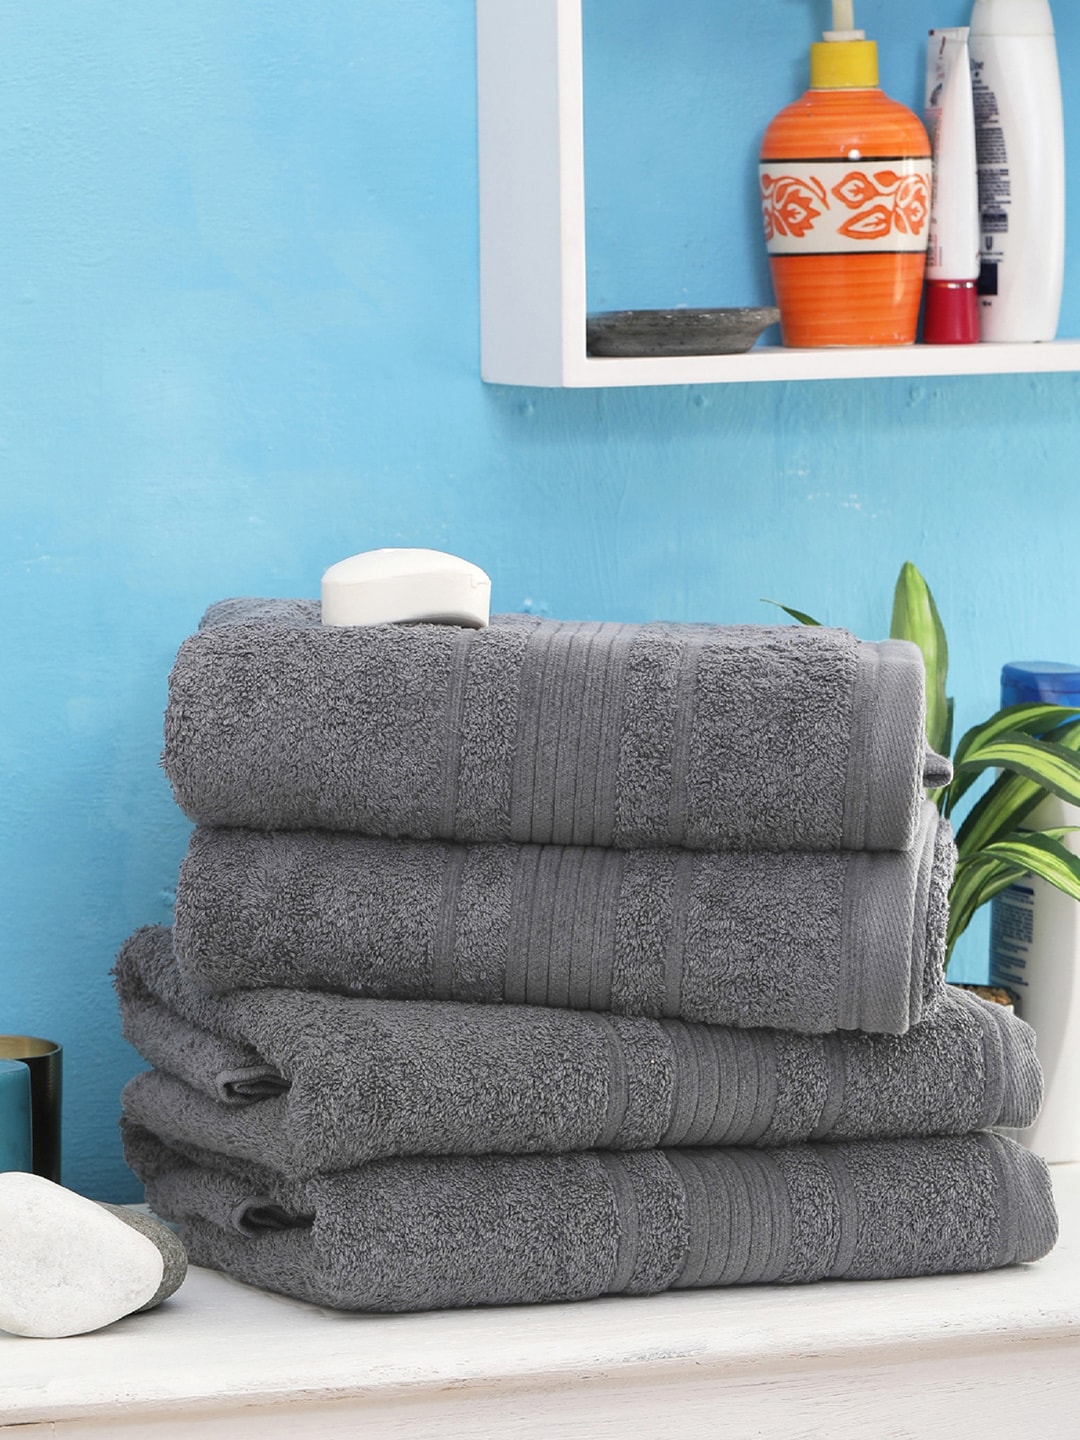 Avira Home Set of 4 Grey Solid 600 GSM Cotton Bath Towels Price in India